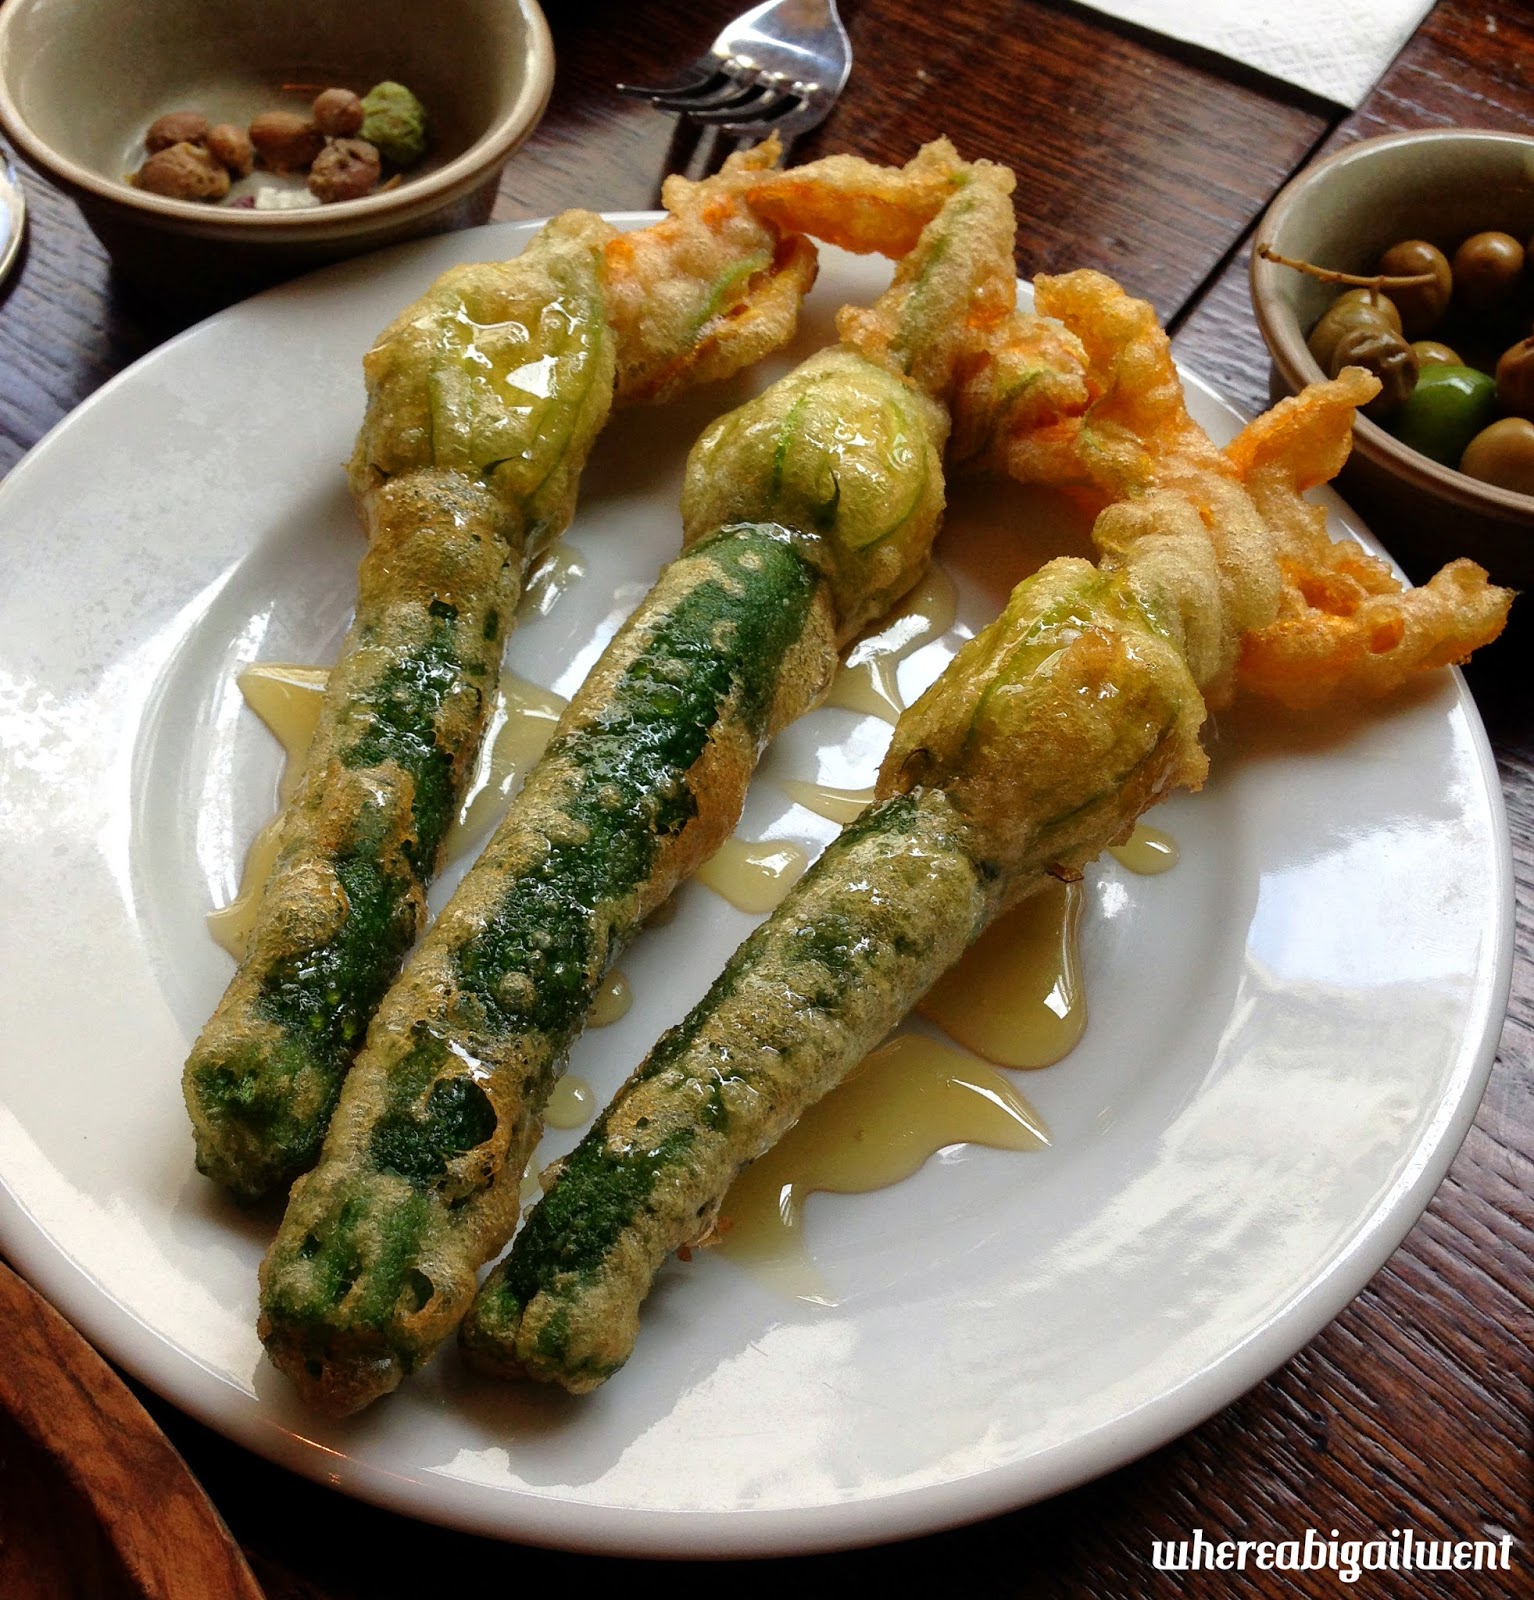 Courgette Flowers Stuffed with Cheese